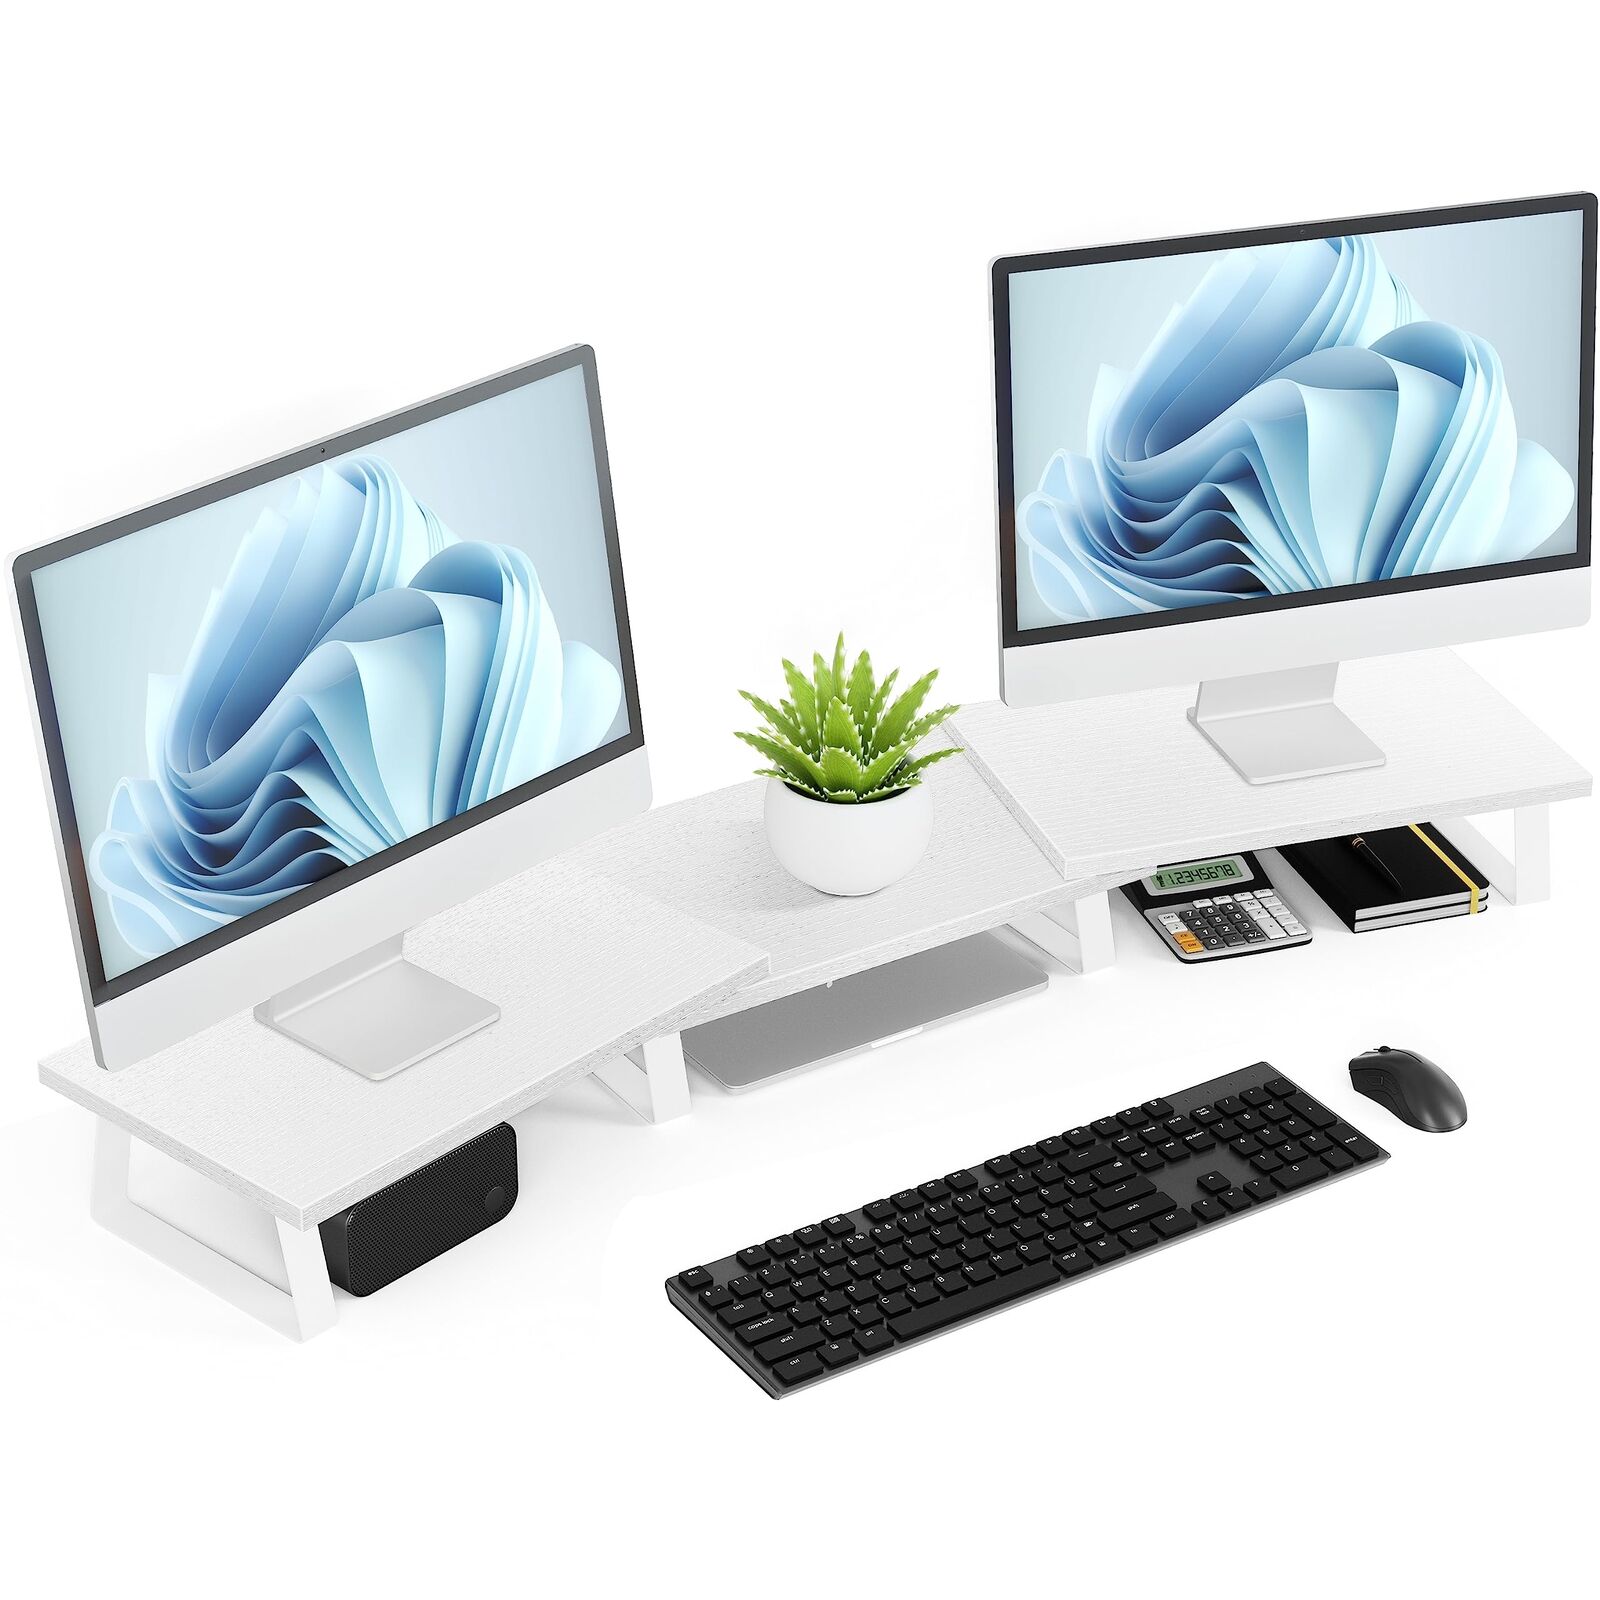 Aothia Large Dual Monitor Stand - Computer Monitor Stand, Desk Shelf for Moni...